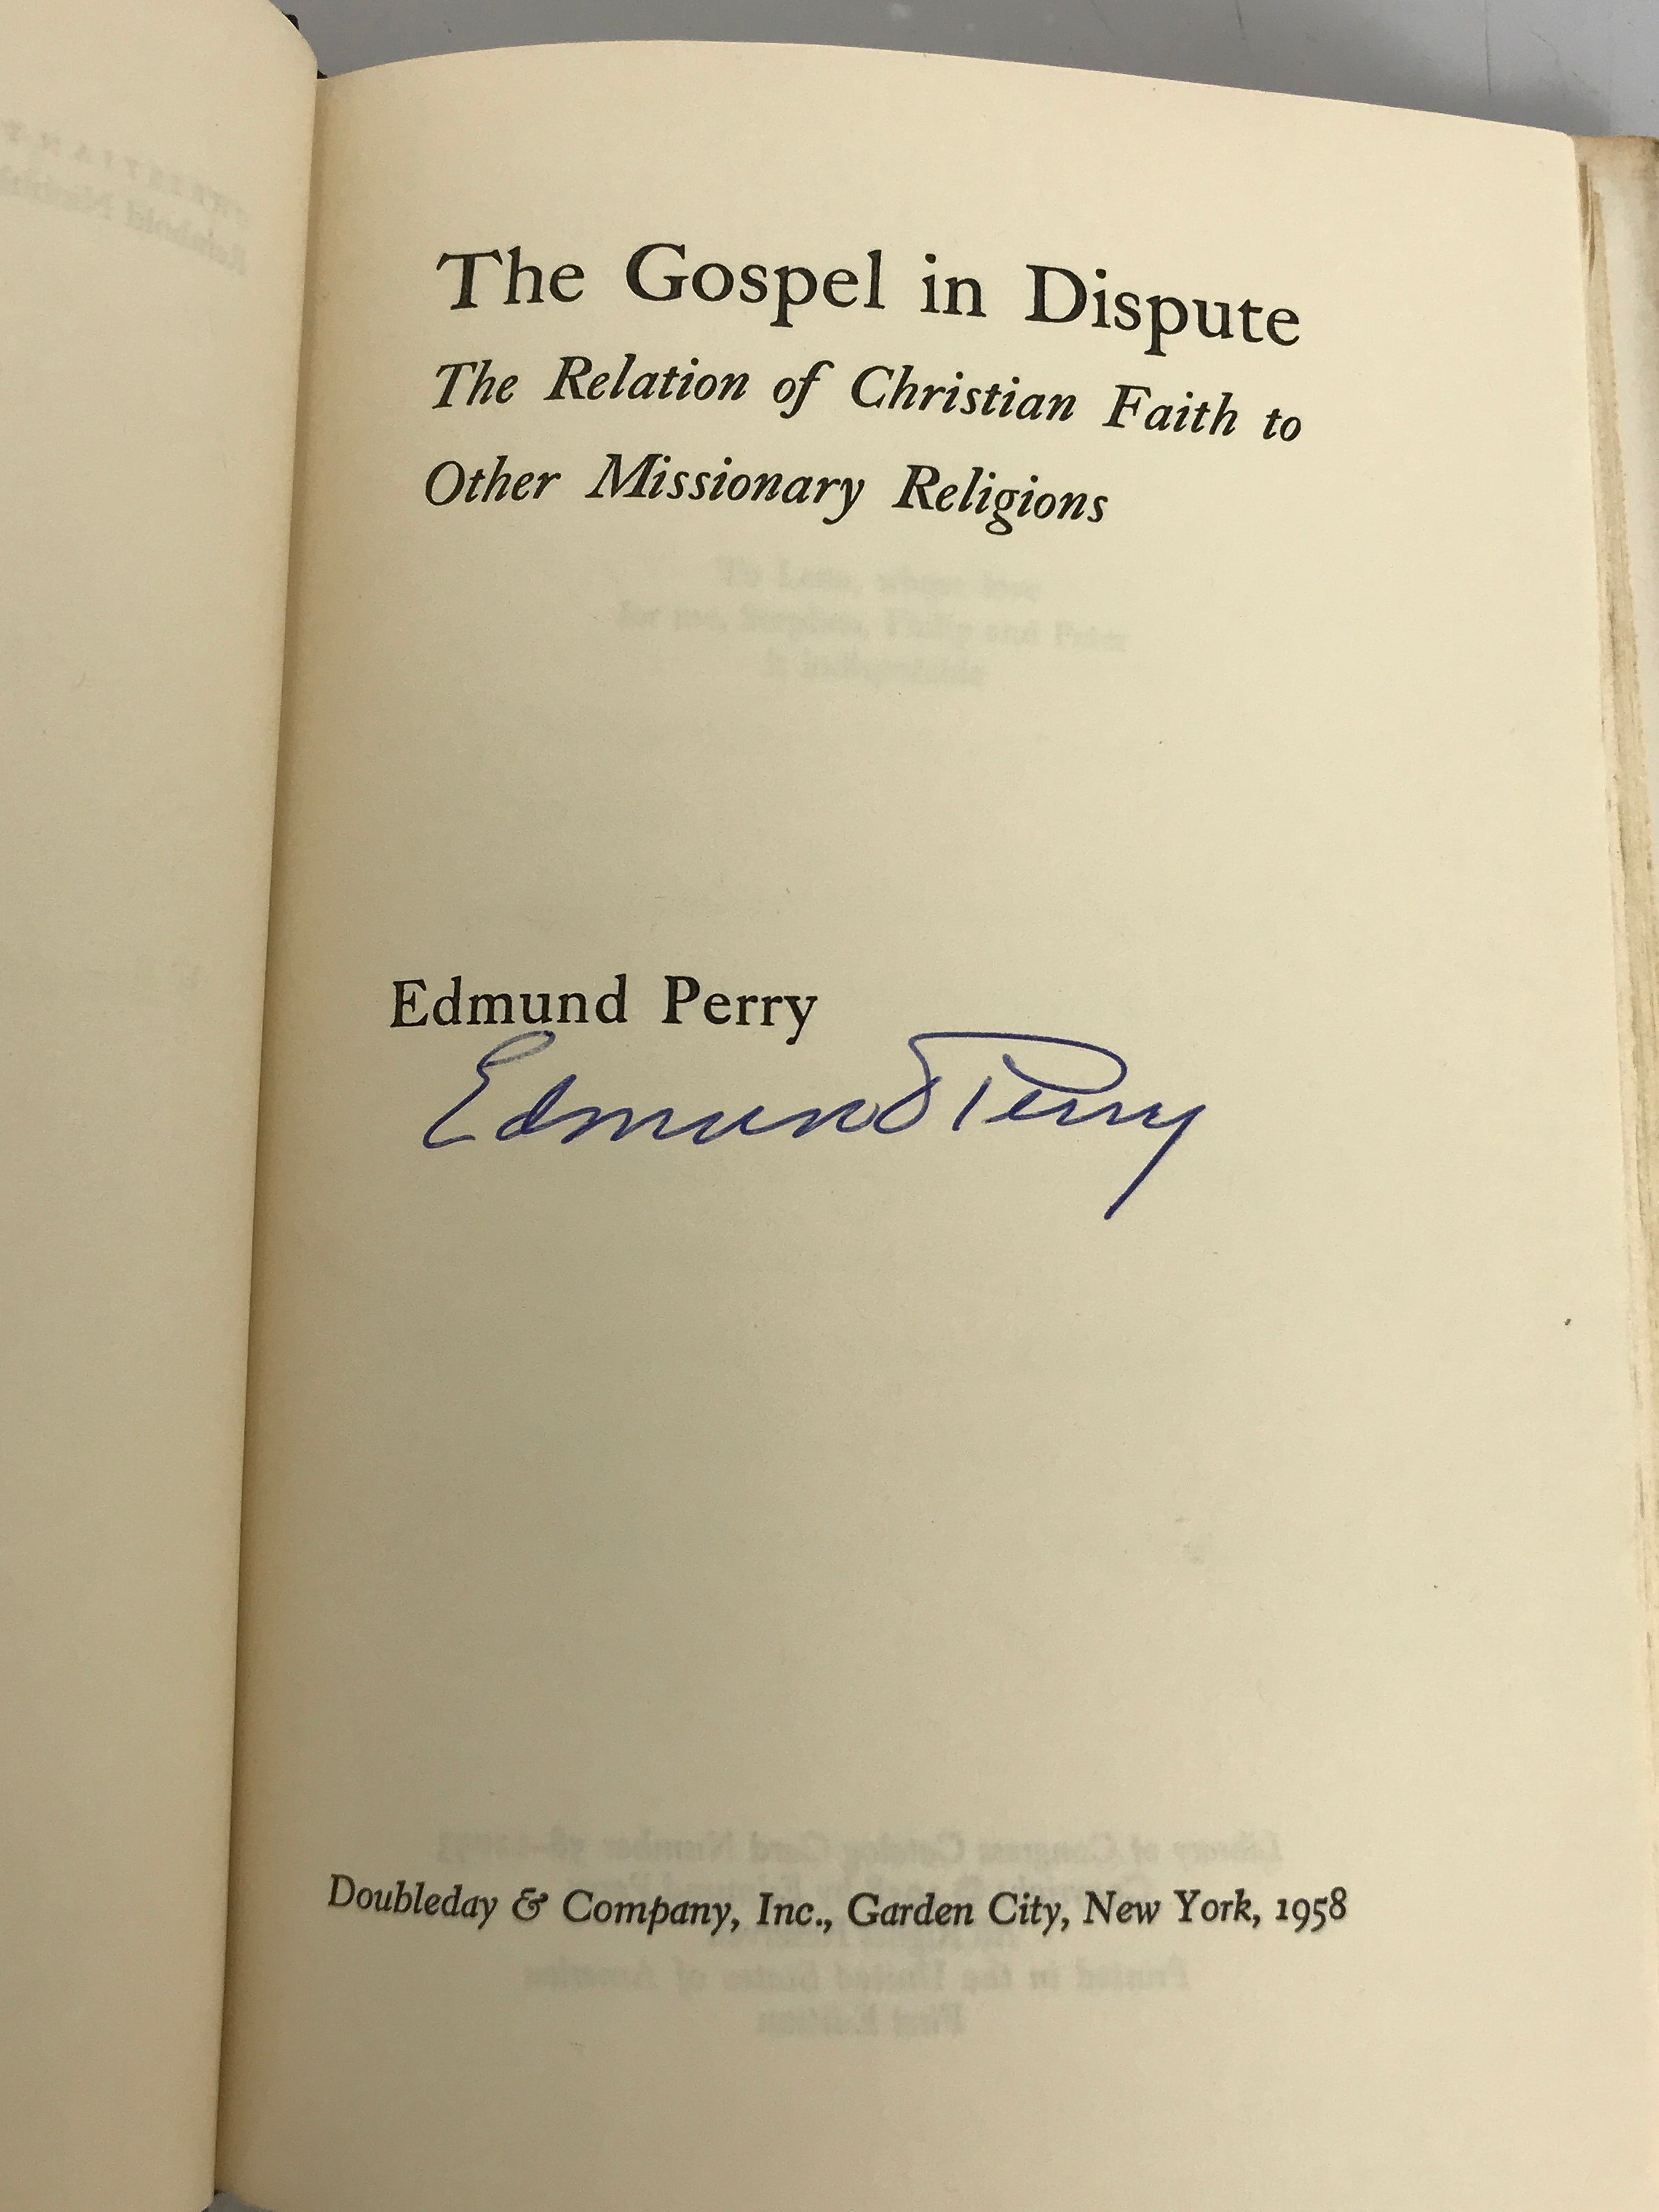 The Gospel in Dispute by Edmund Perry First Edition Signed by the Author 1958 HC DJ